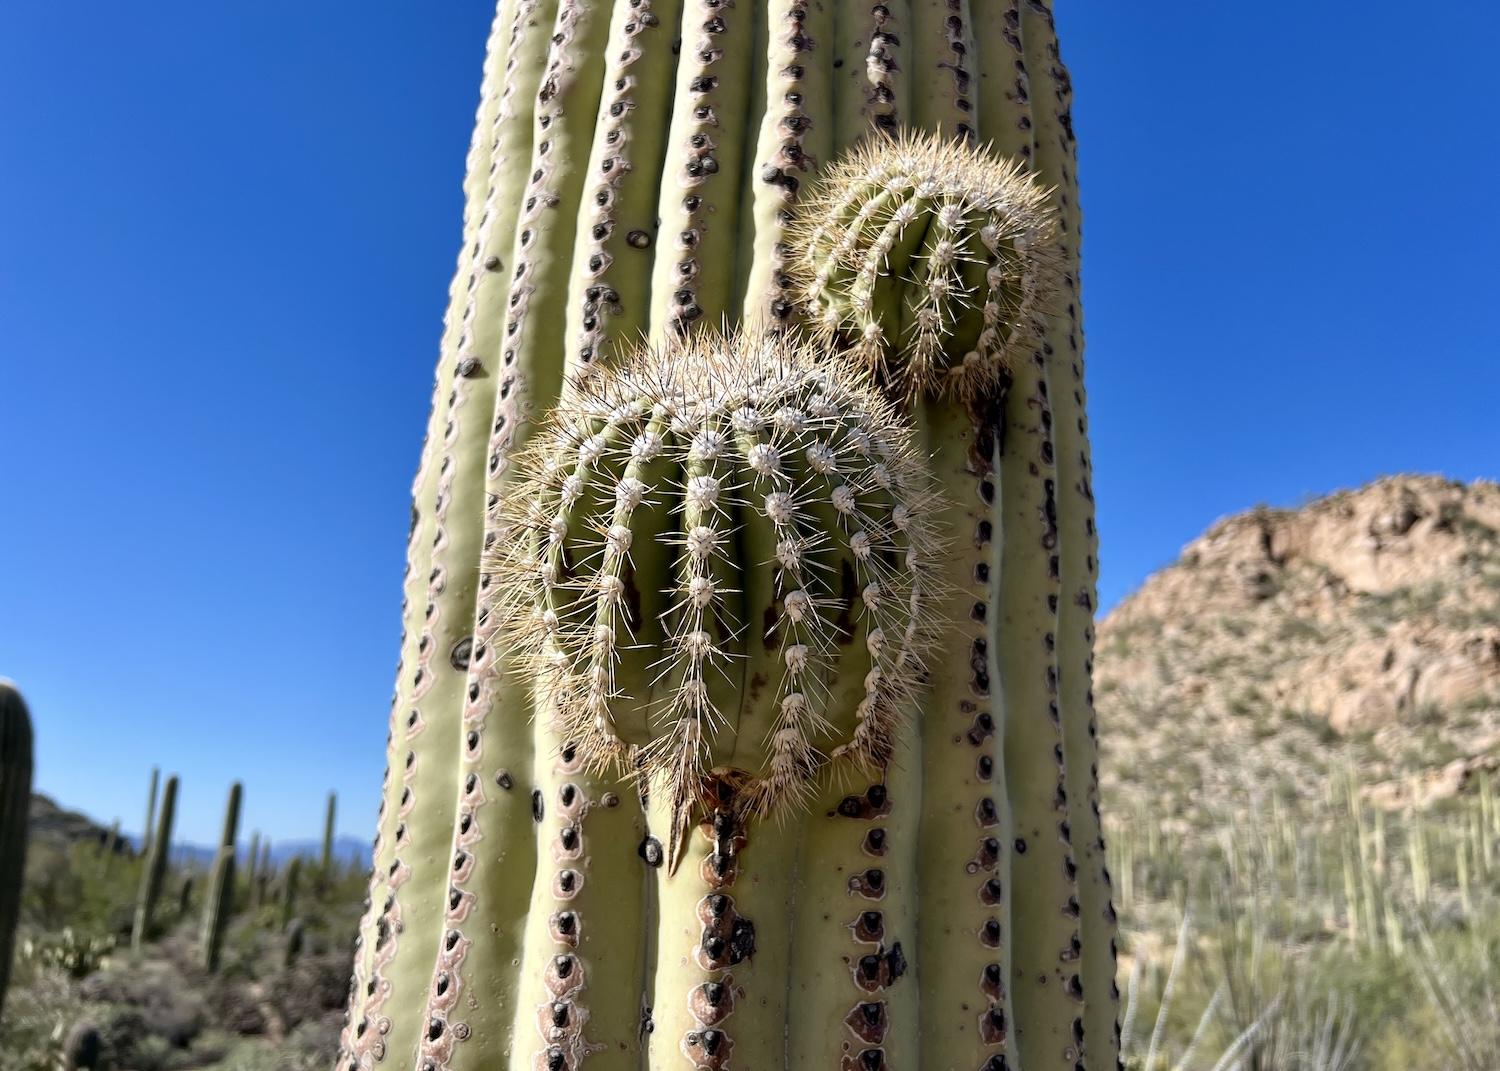 Young, healthy arms start to grow off a saguaro cactus.